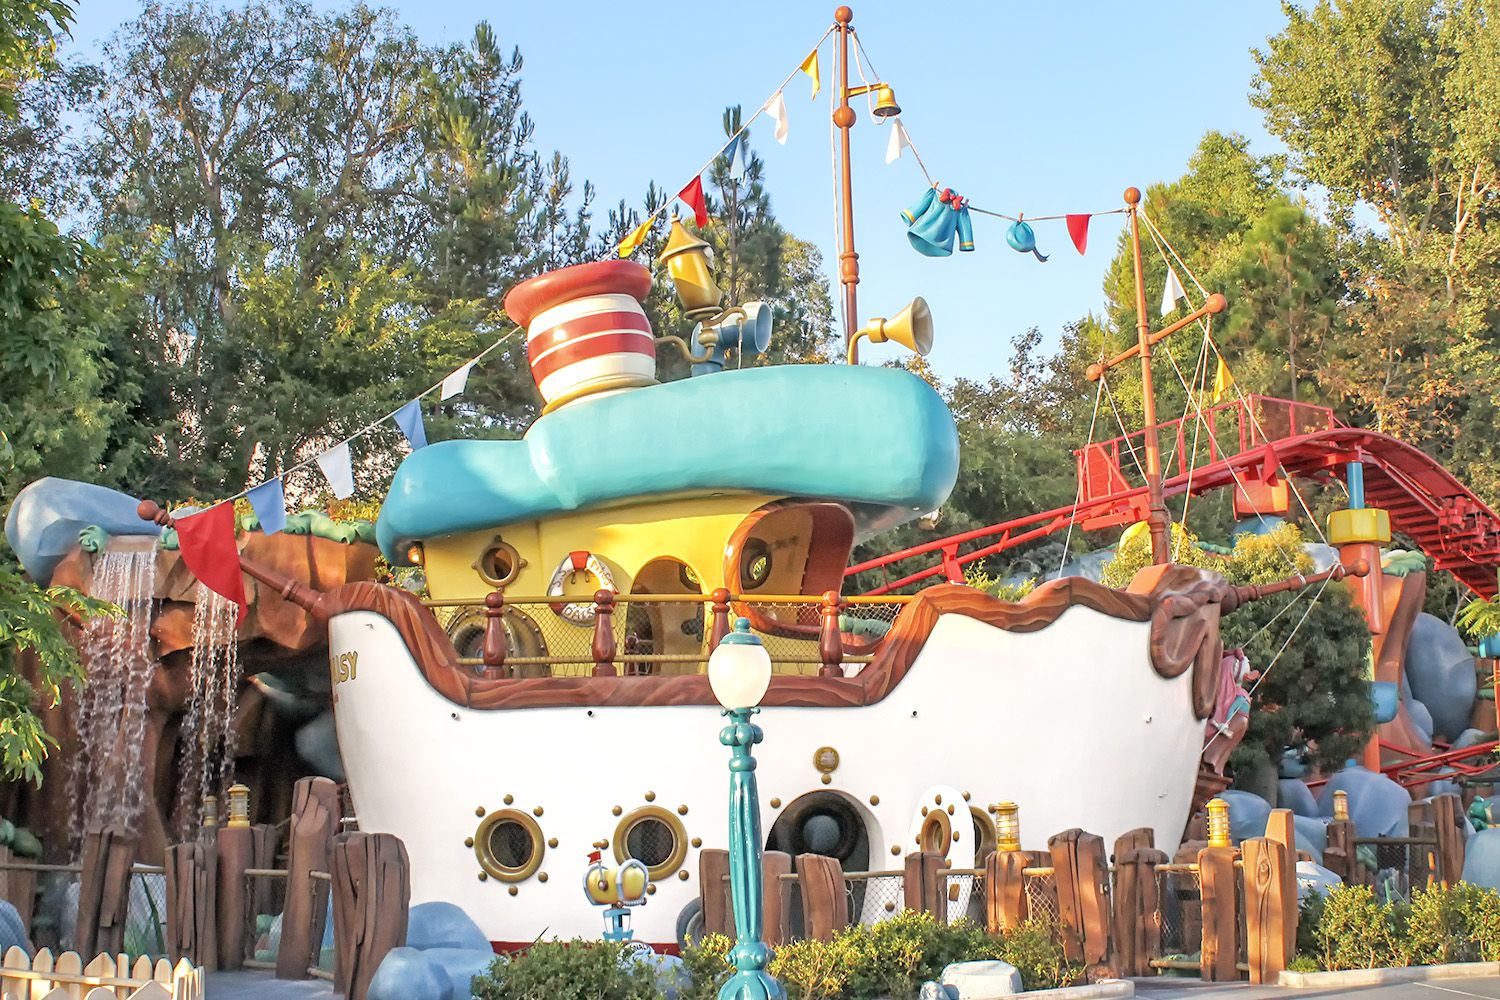 Donald's Boat at Disneyland: Things You Need to Know